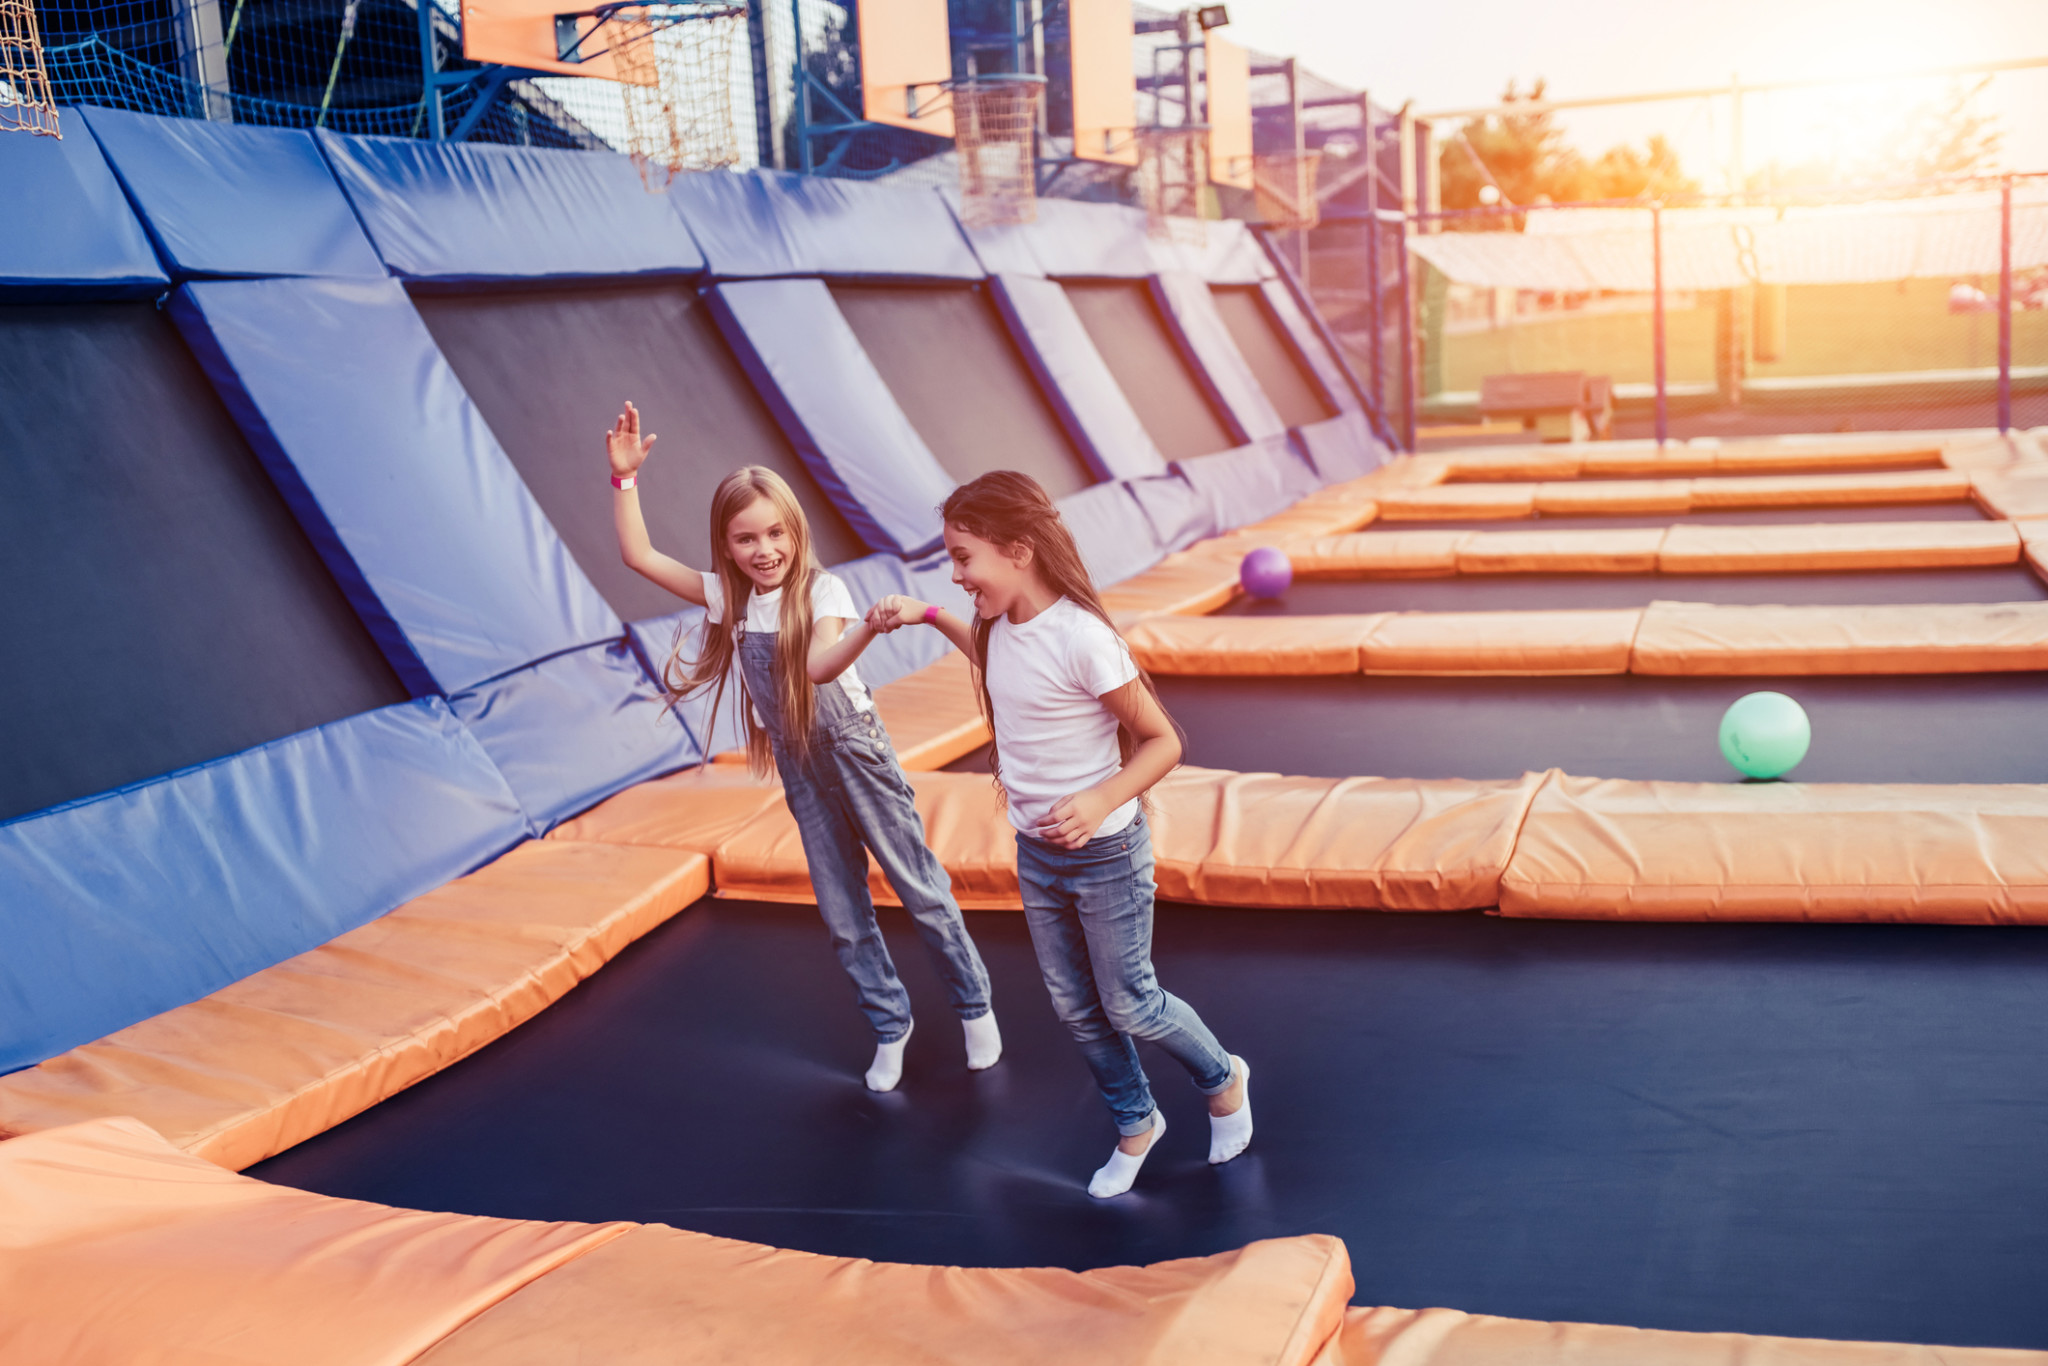 Liability Insurance for Trampoline Parks